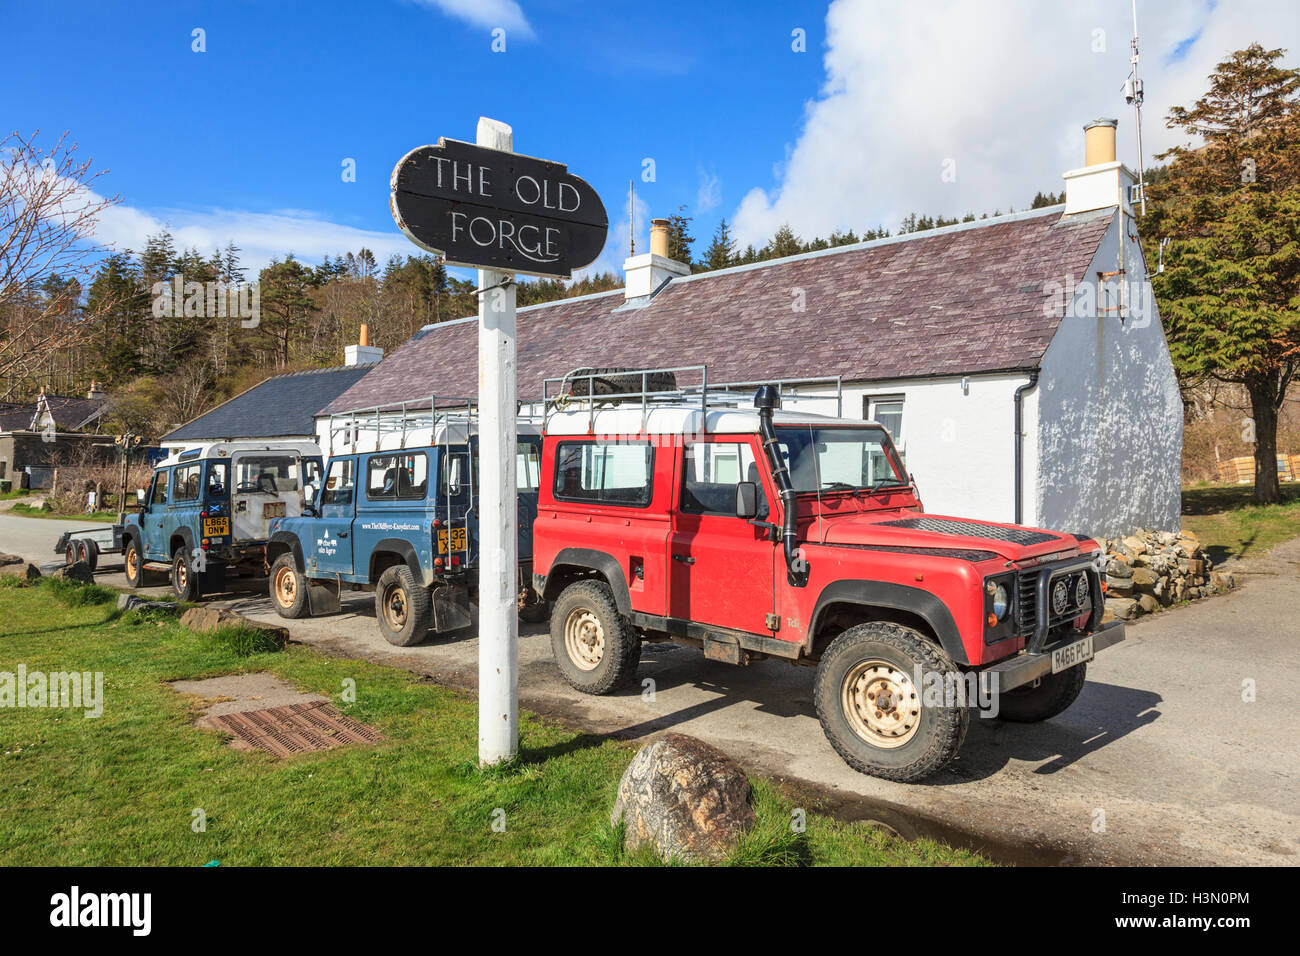 The Old Forge, Inverie, Knoydart Stock Photo